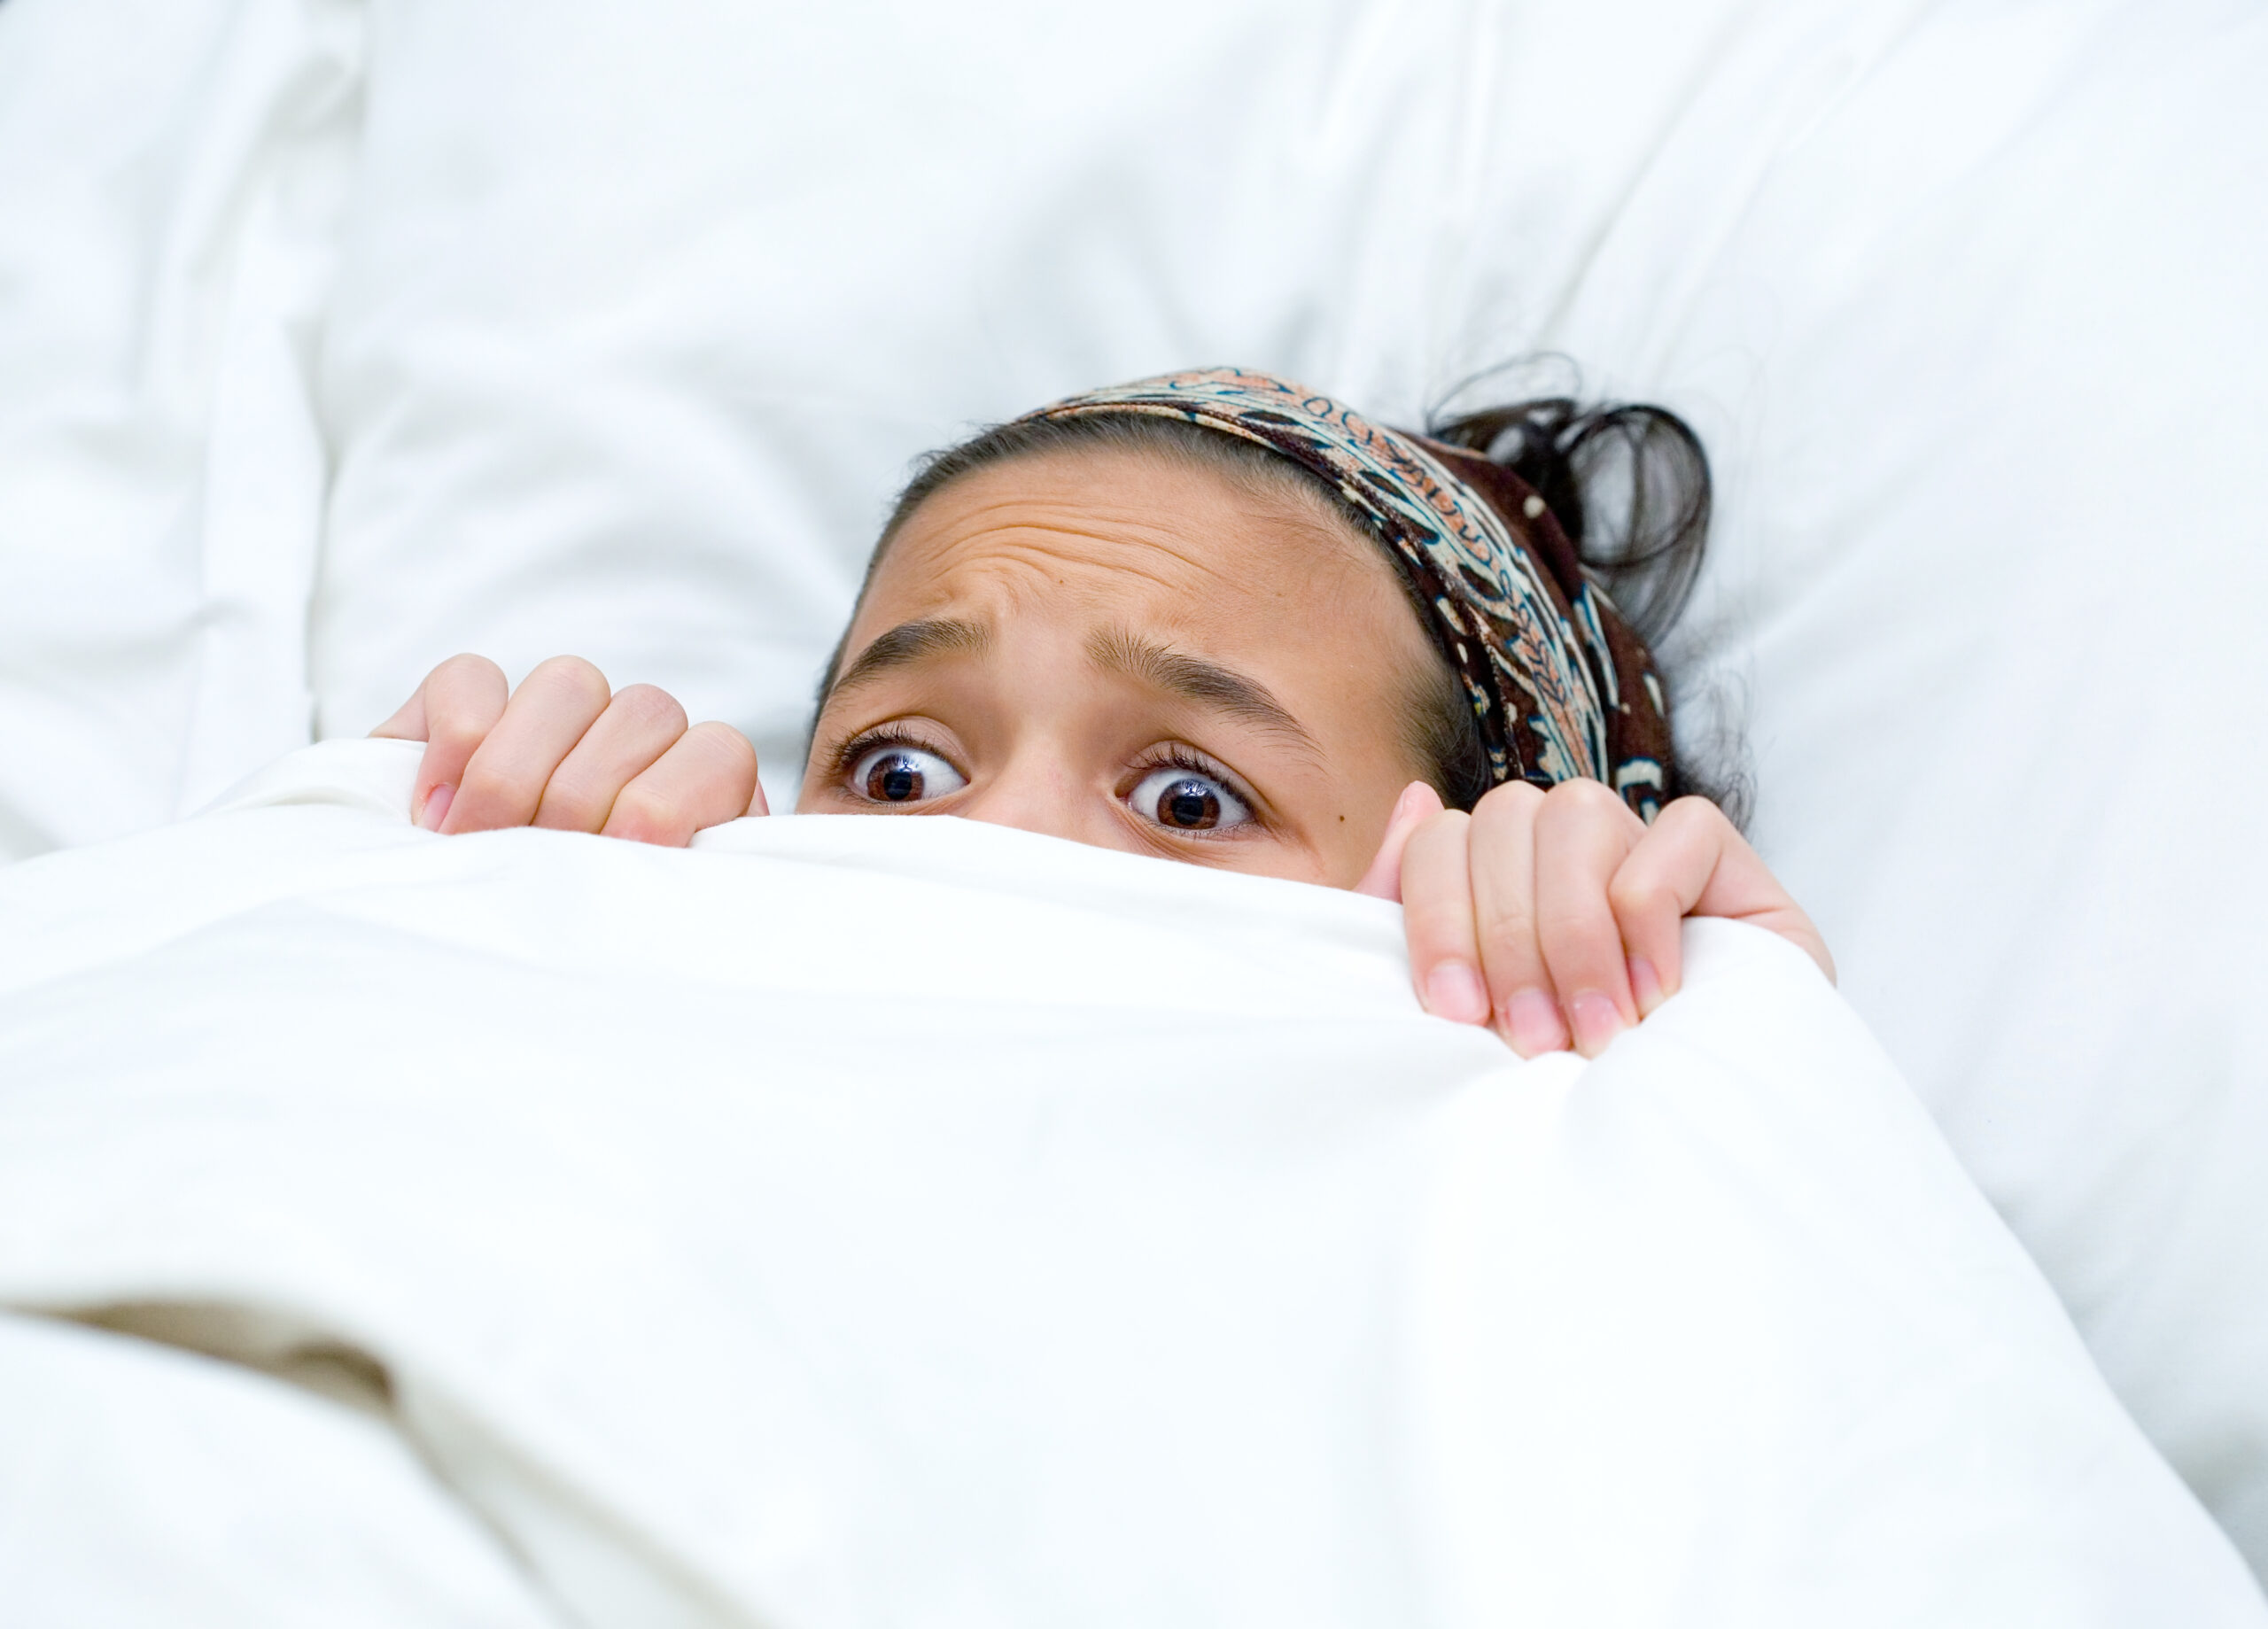 Don’t let bedwetting make bedtime scary